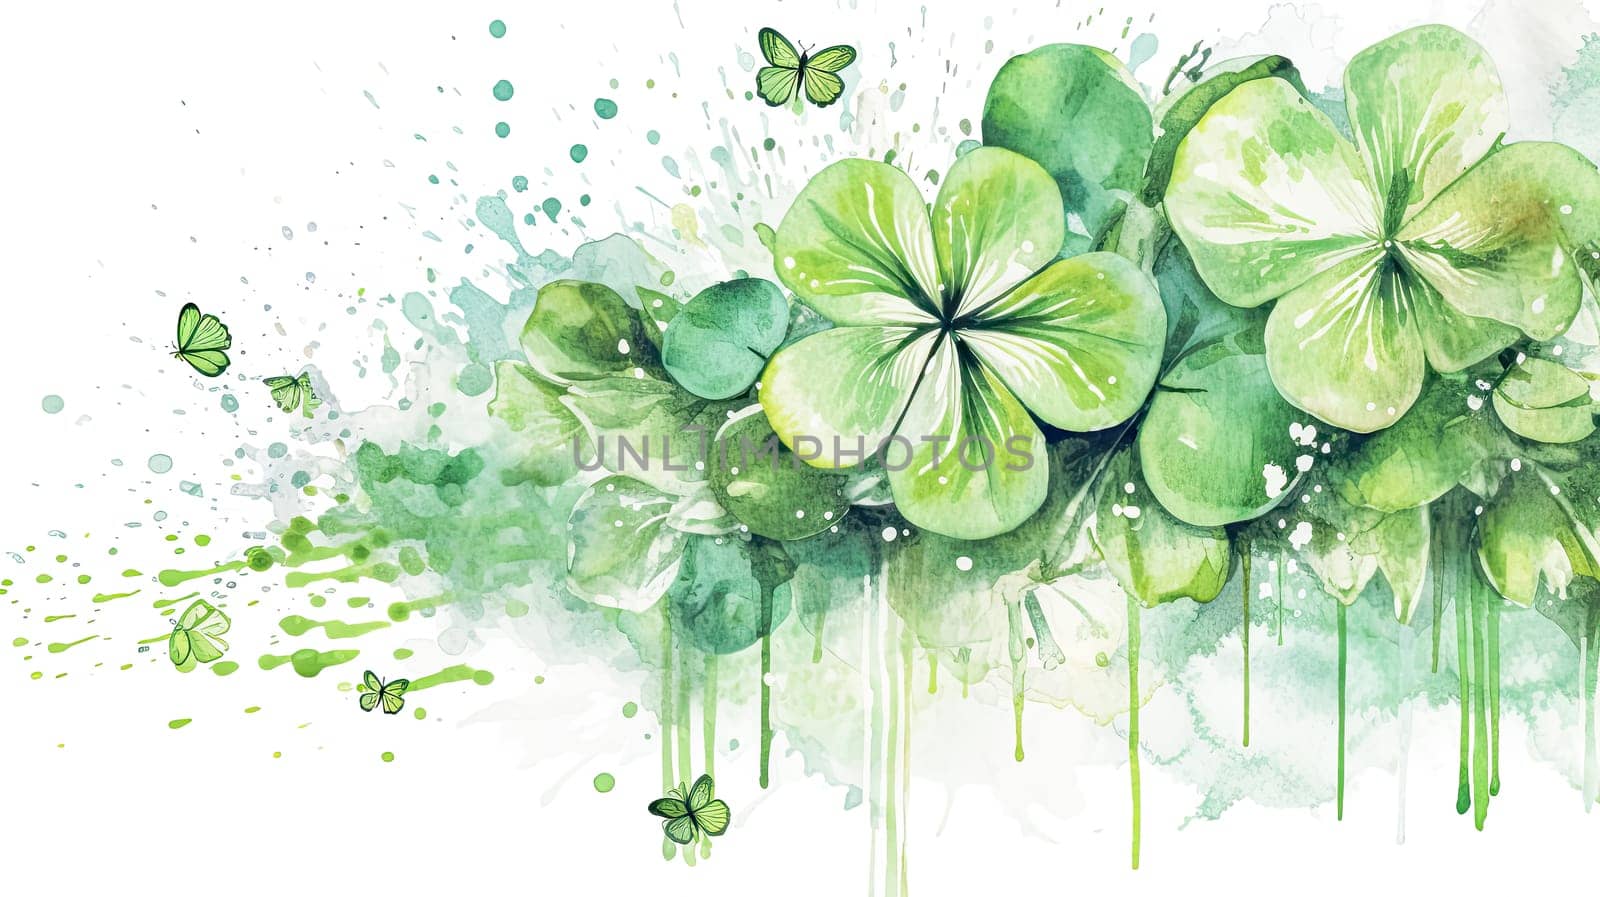 Captivating watercolor celebrates St. Patricks Day with a vivid depiction of the clover, a timeless symbol of luck and prosperity